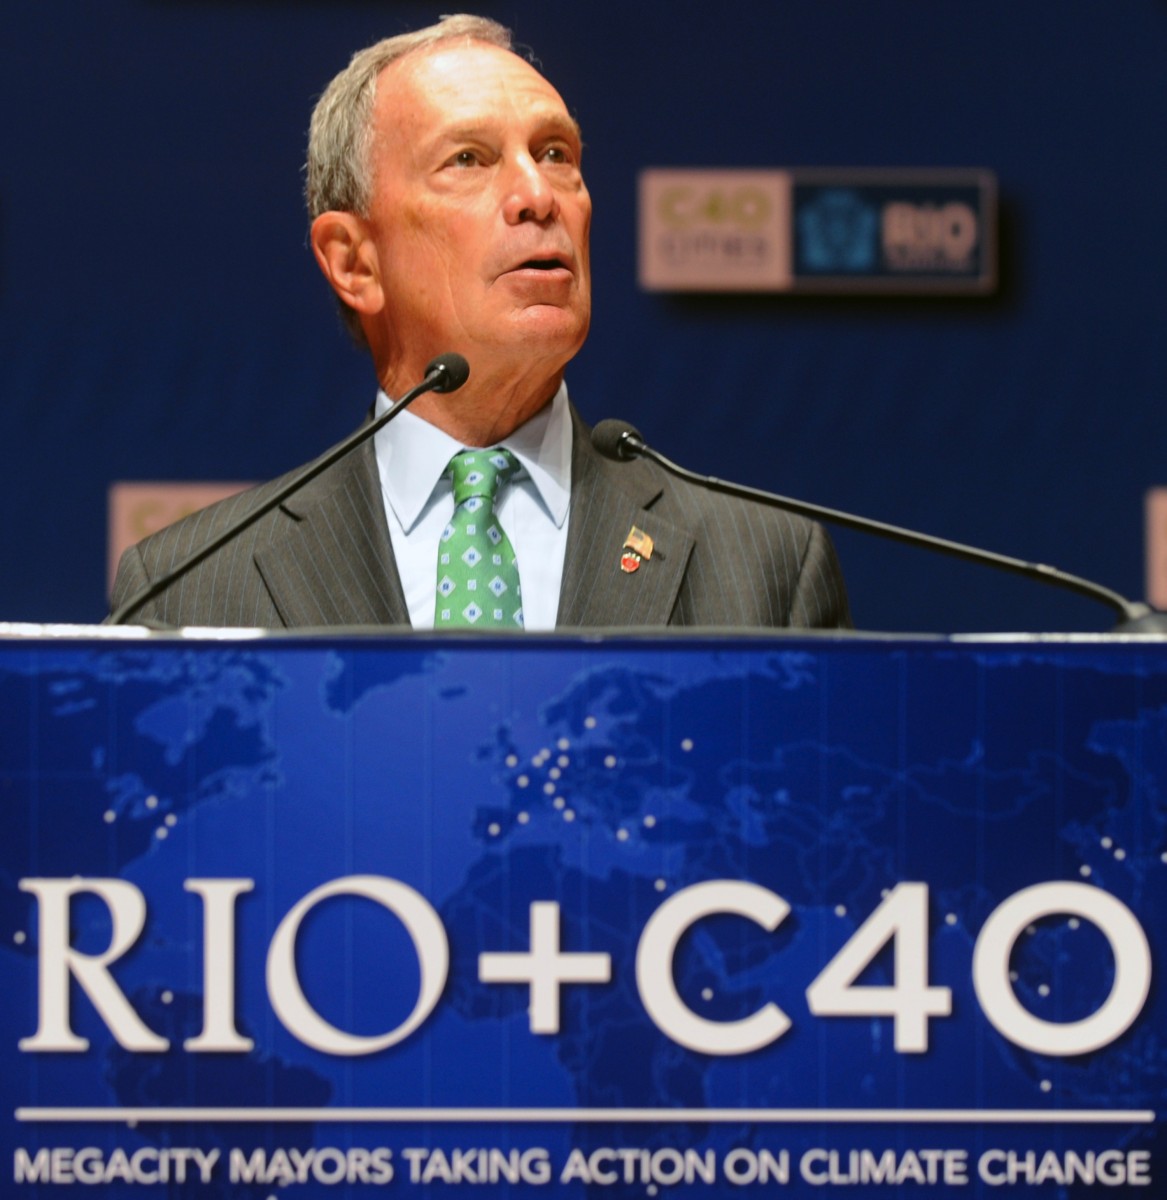 New York City Mayor Michael Bloomberg delivers a speech during the Rio+C40 MegaCity Mayors